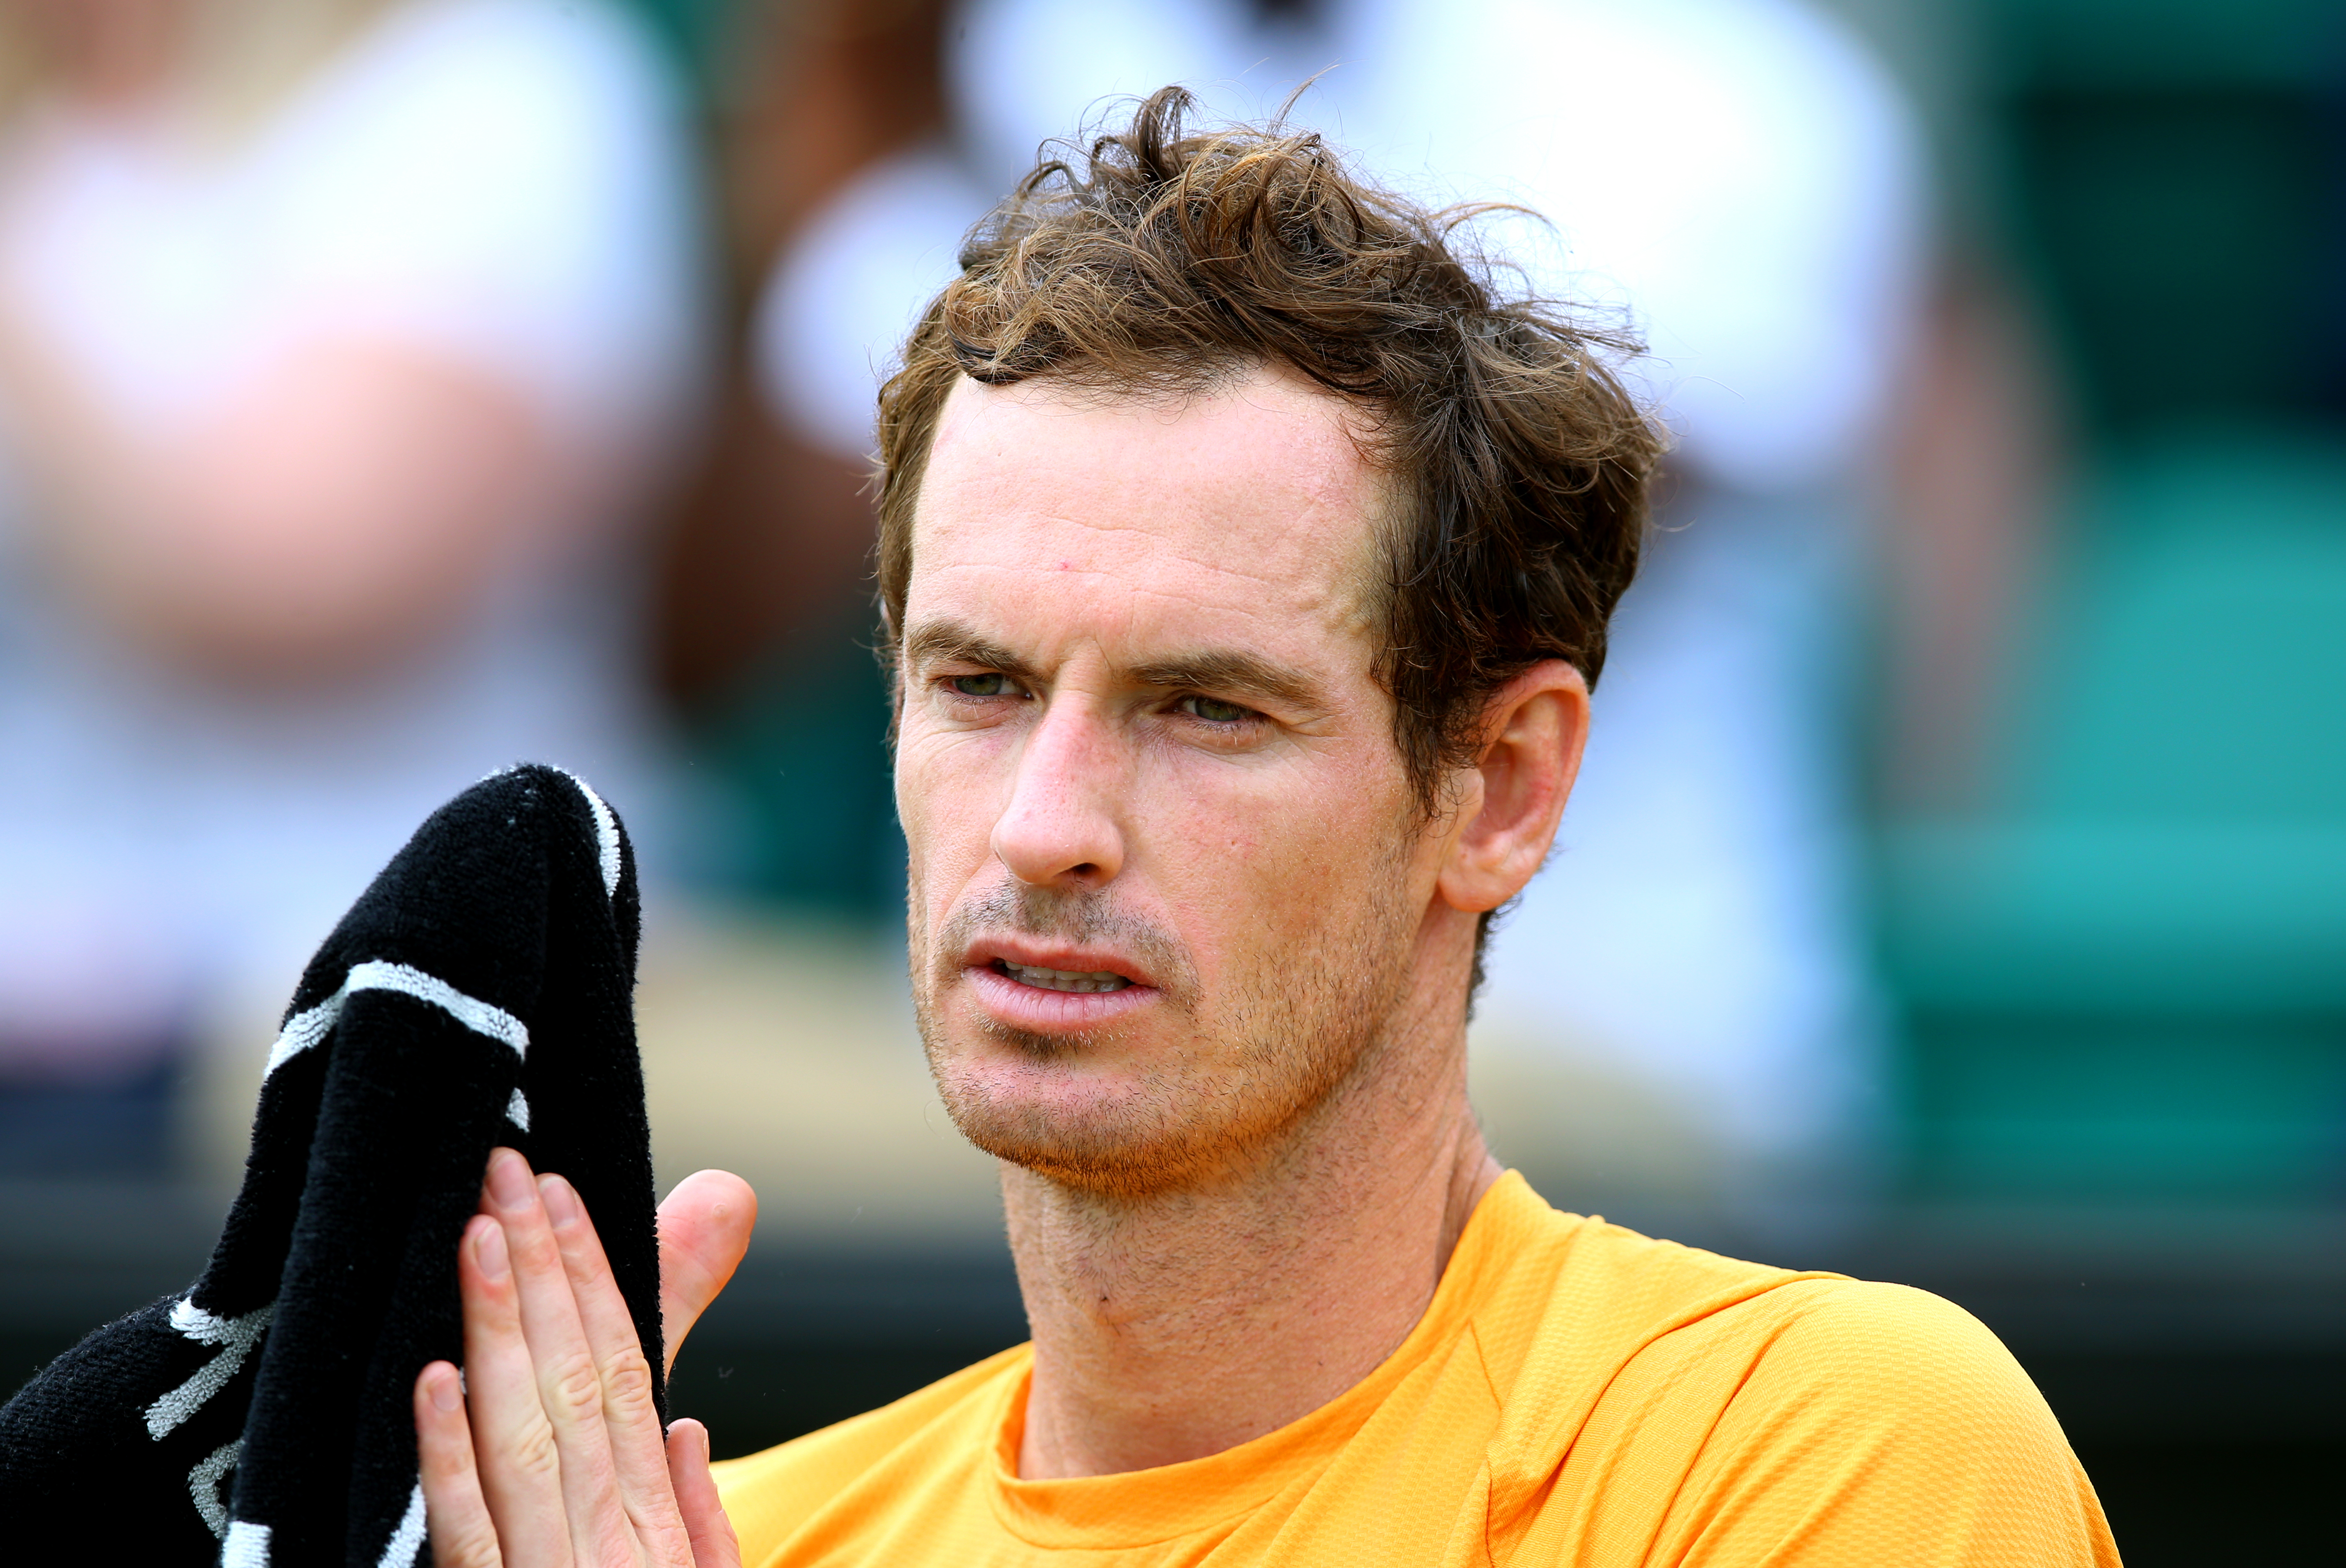 Andy Murray is having his best season since hip surgery